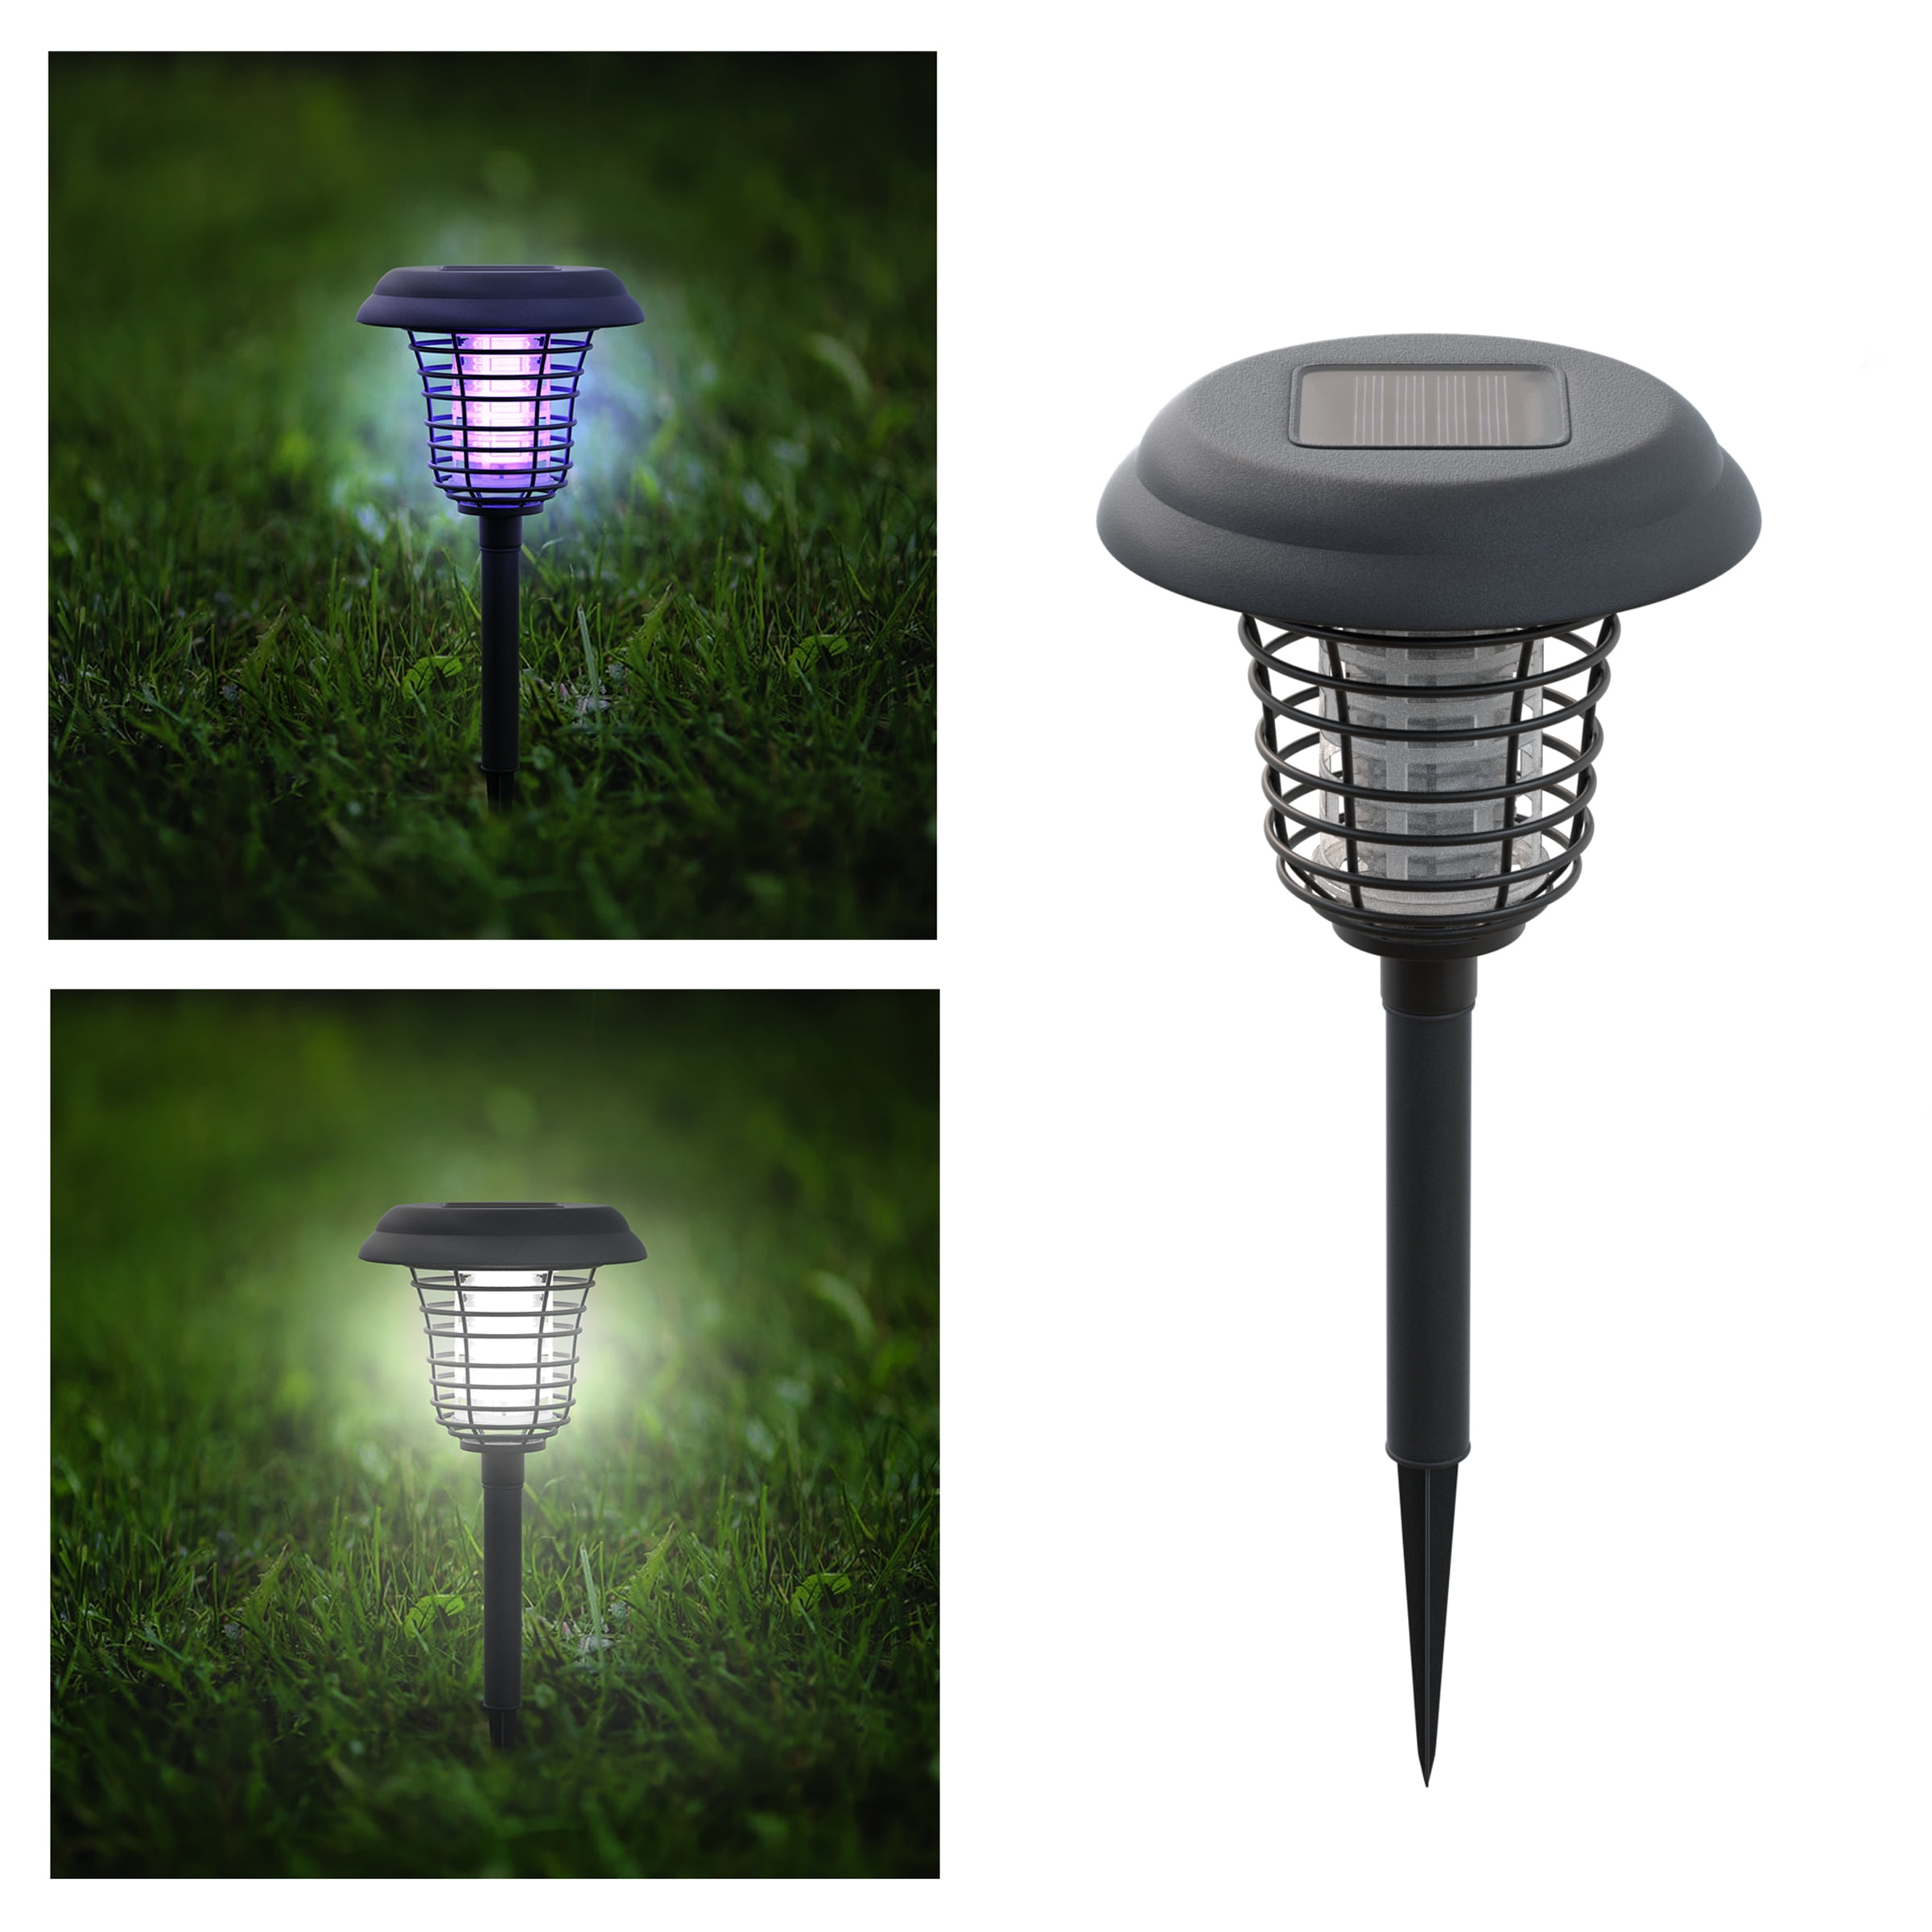 2 LED Solar Powered Outdoor Insect Zapper Anti Mosquito Light Killer Lawn Lamp 